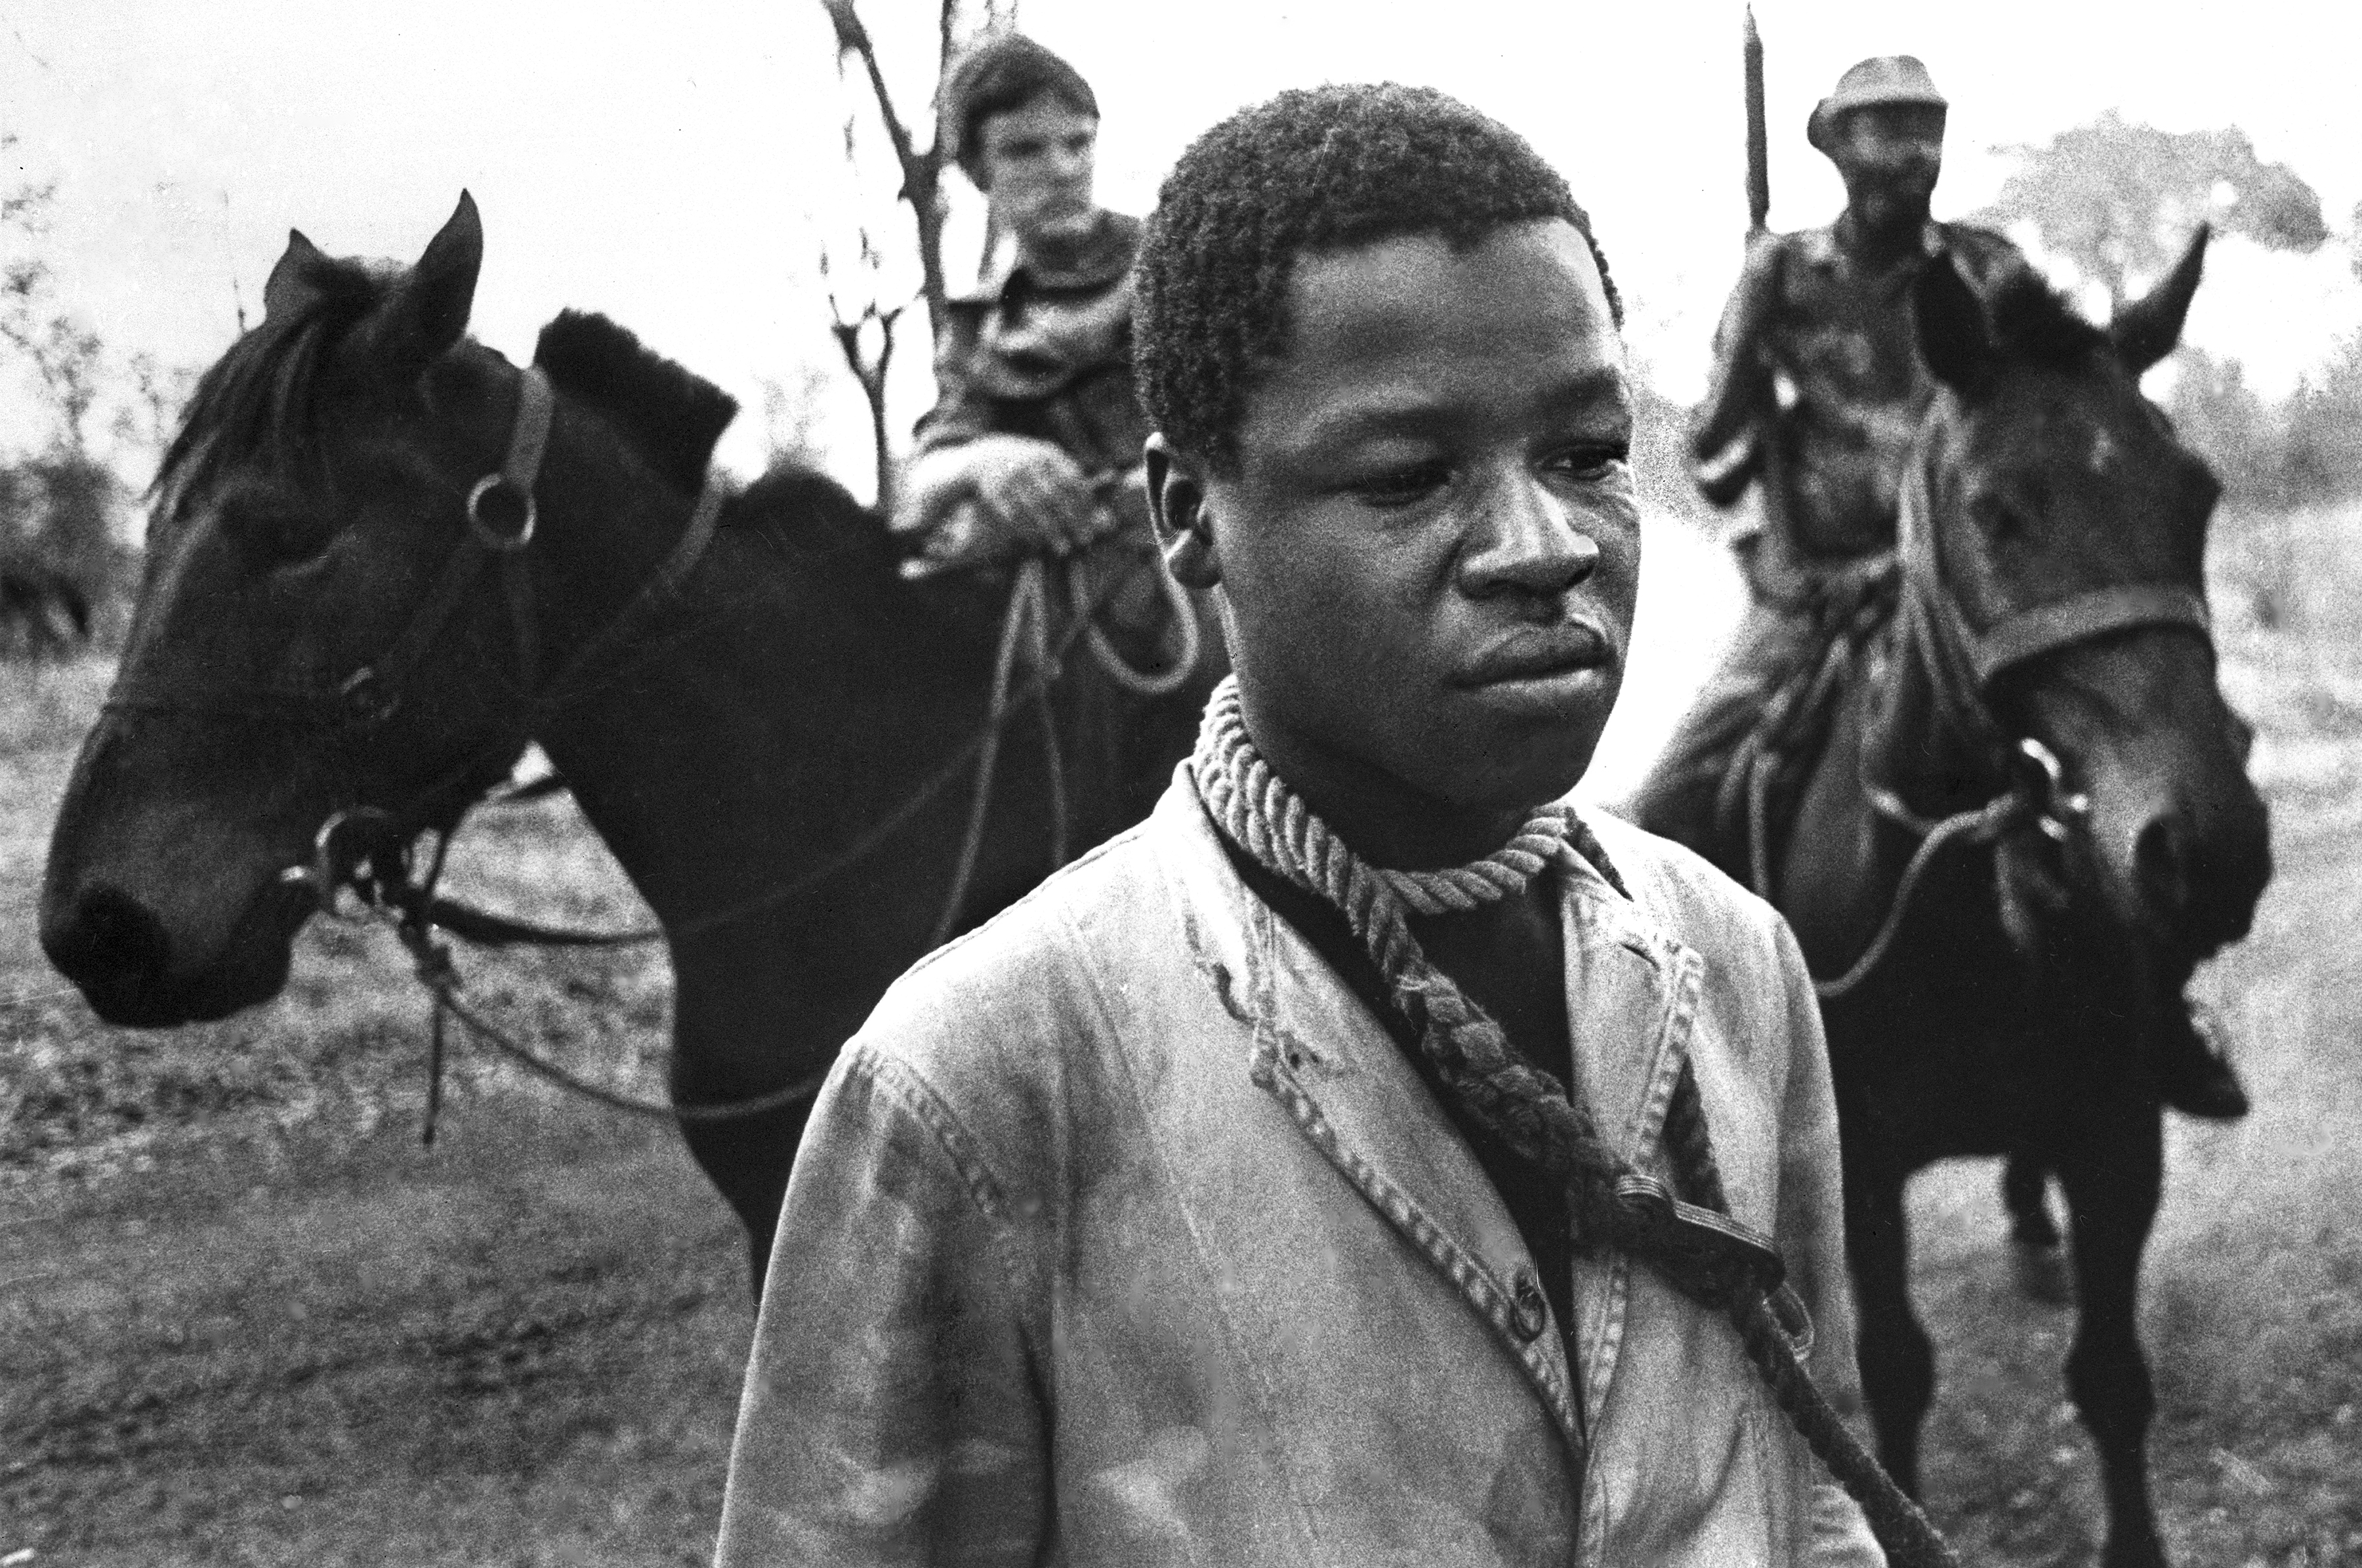 A Rhodesian prisoner stands with a rope tied around his neck to prevent escape, placed there by Rhodesian cavalrymen, background, who detained him for questioning in Lupane, southern Rhodesia, in September 1977. Rhodesia's white-dominated government was countering black guerrilla activities with militant armed forces. (AP Photo/J. Ross Baughman)